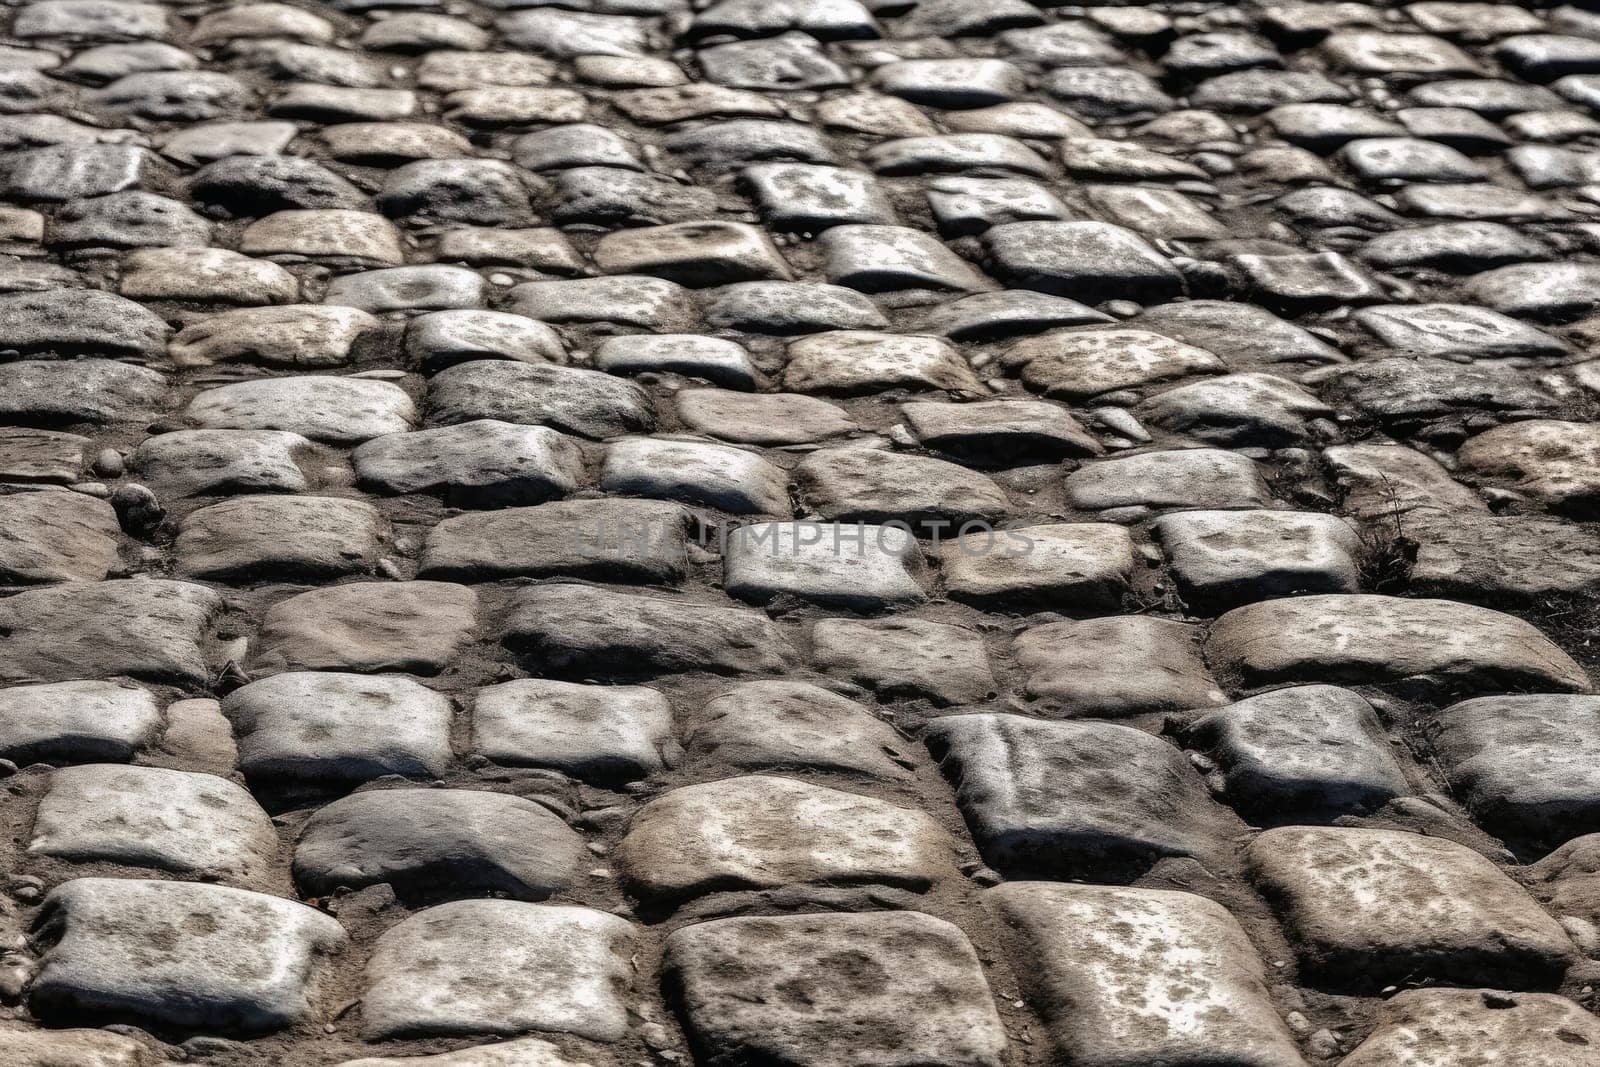 Background of an old cobblestone street in a historic old town. by MP_foto71